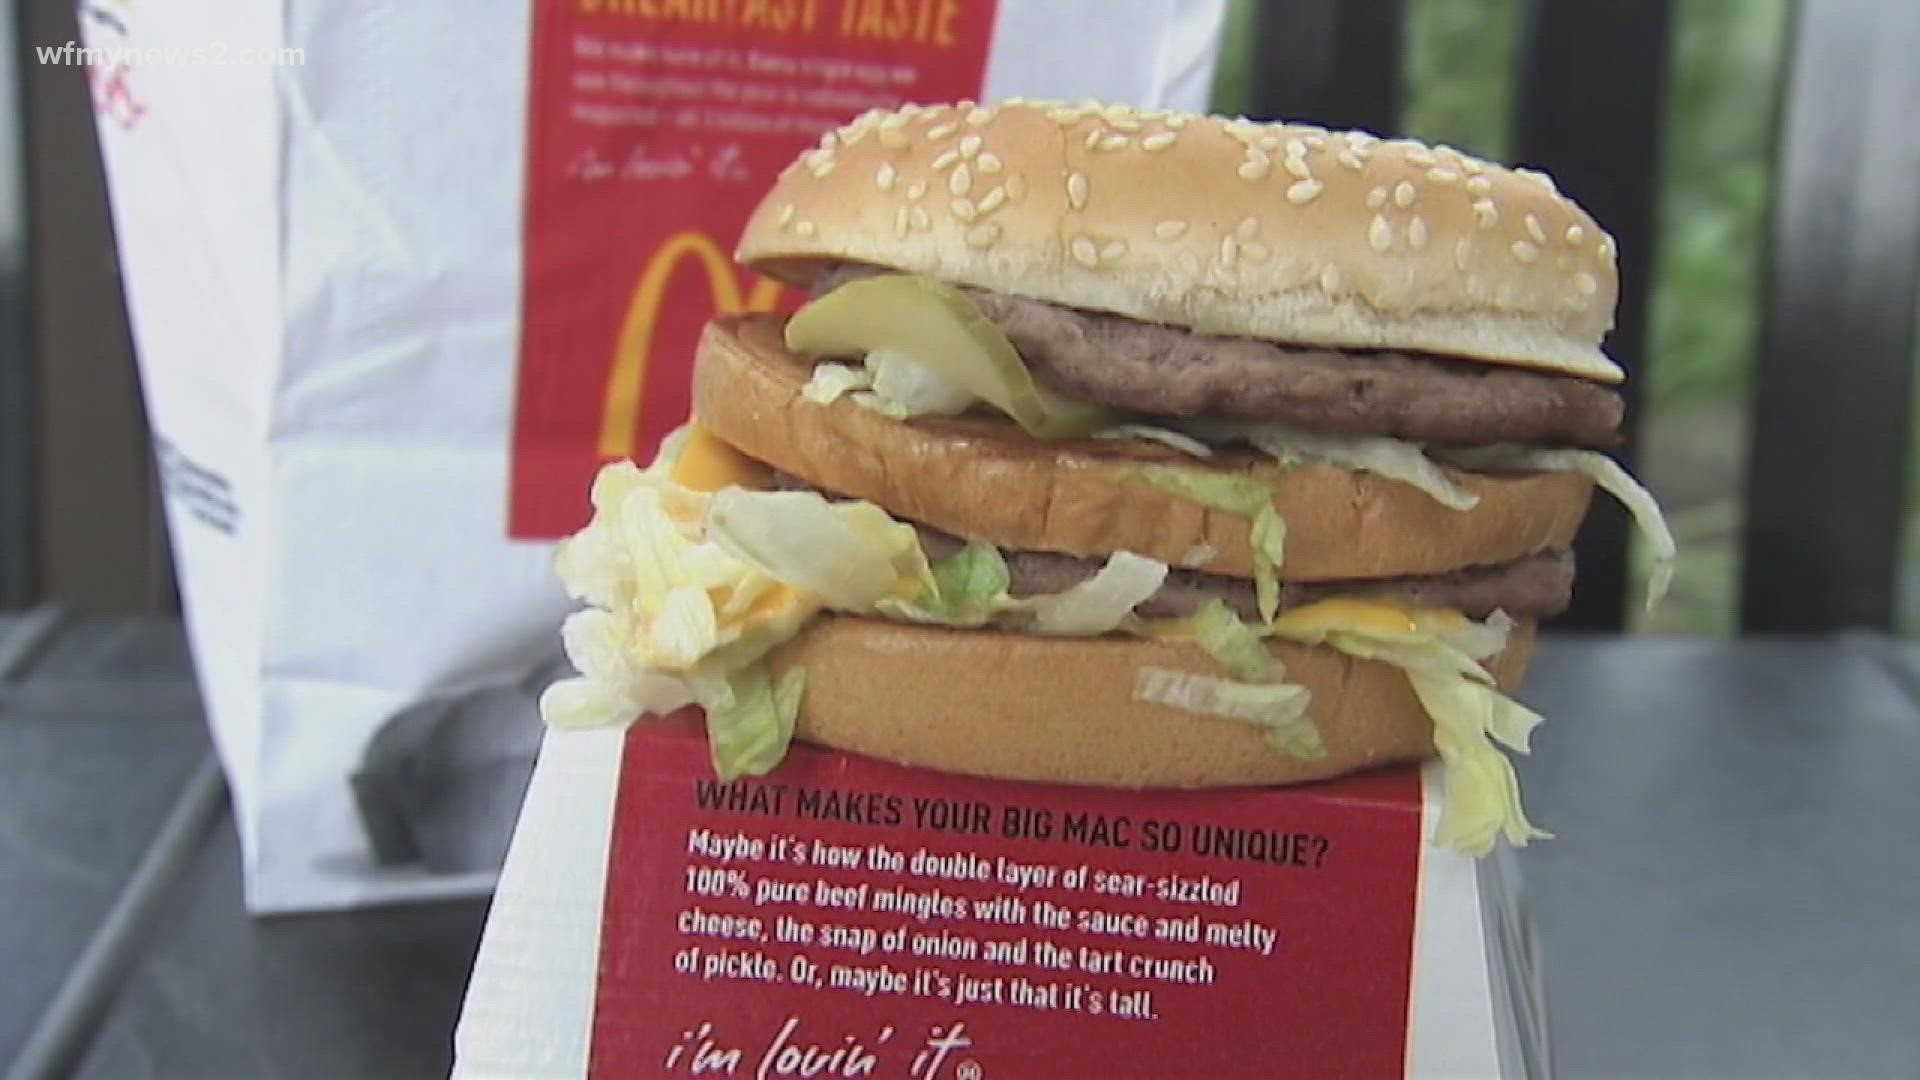 Beware of fast-food wrappers some could be harmful to your health.